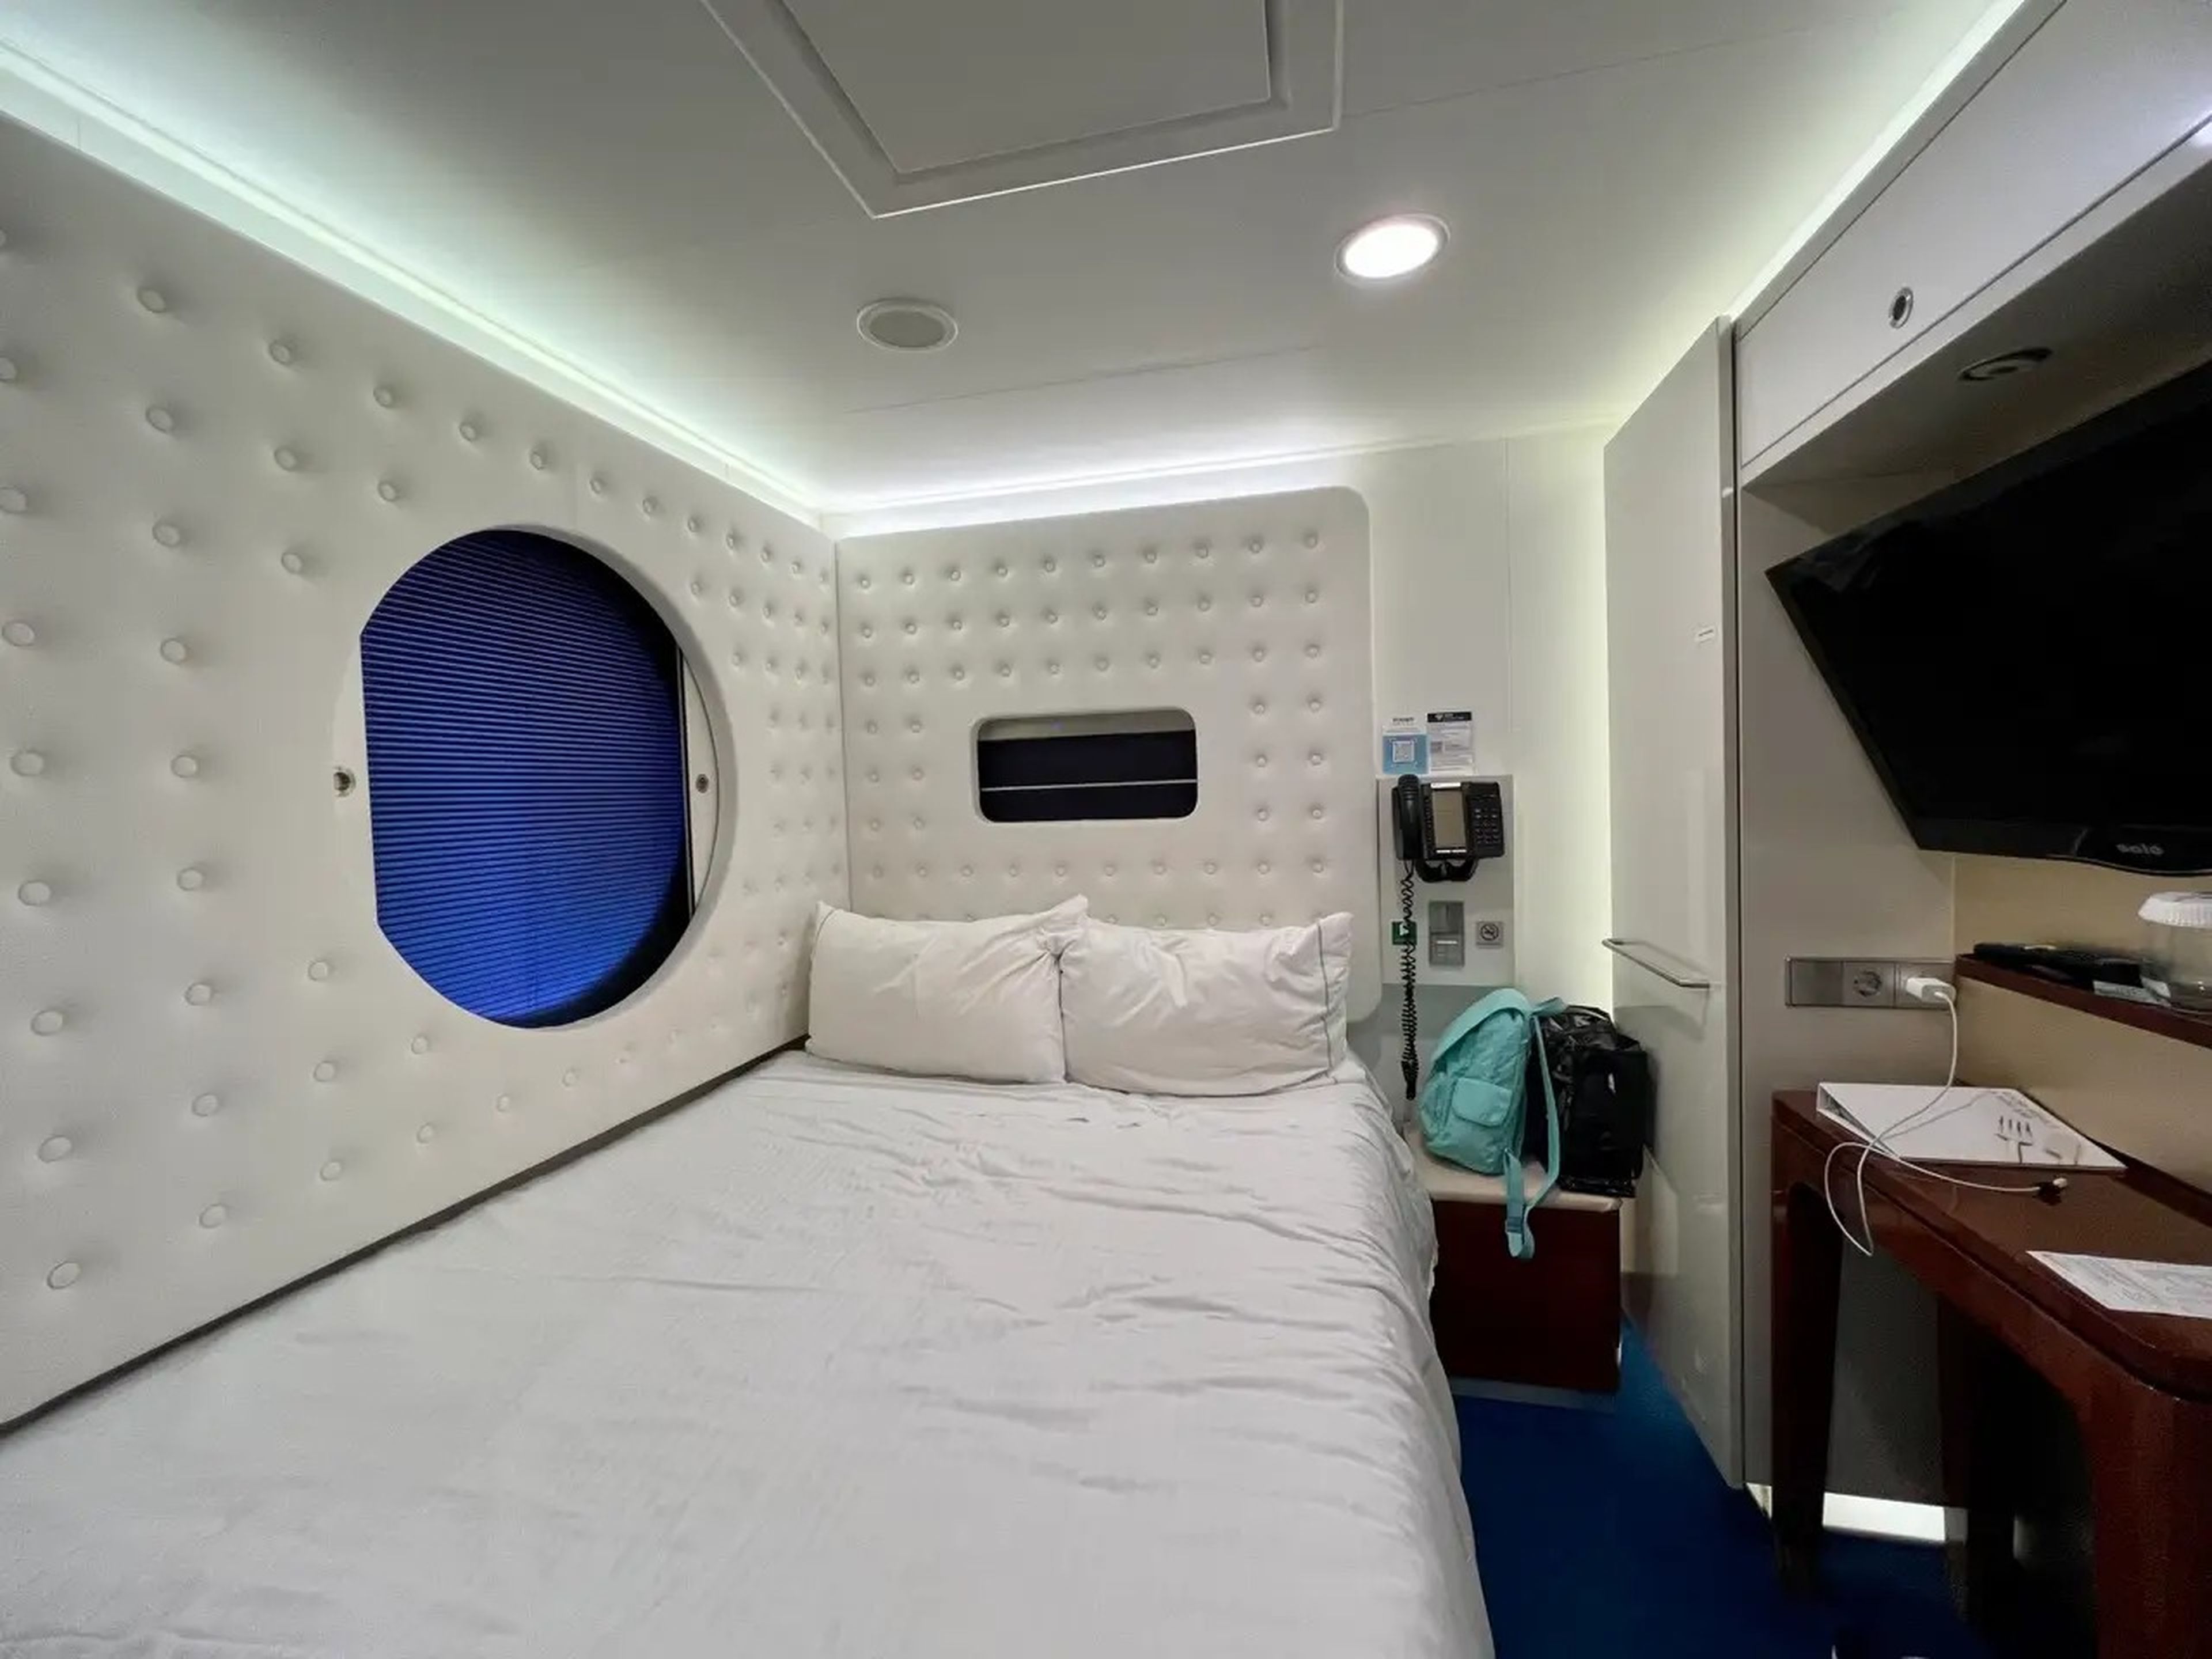 Studio stateroom on the NCL Getaway with a window into the hallway and white quilted walls around a bed